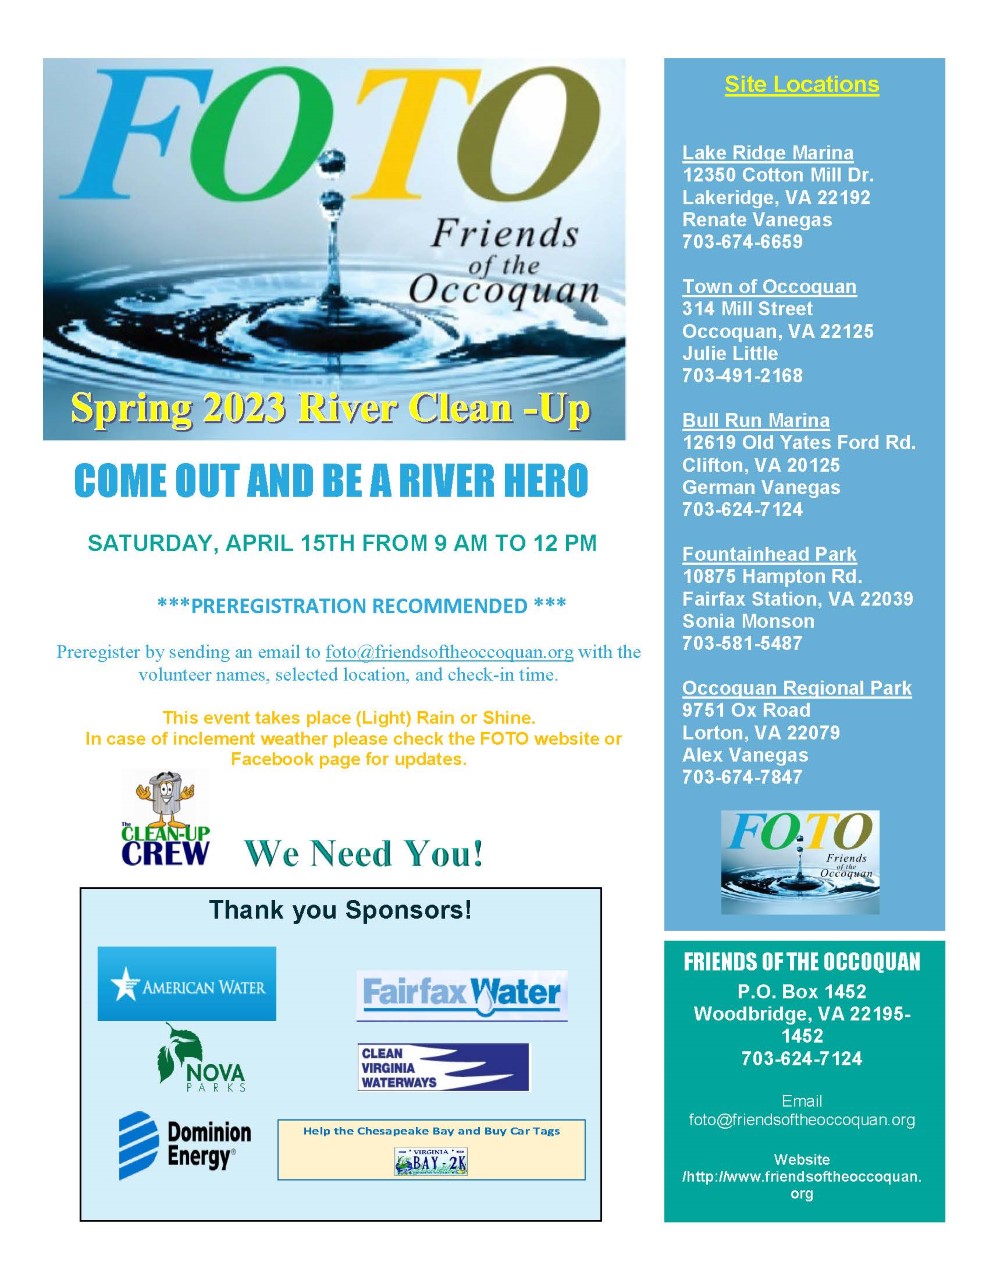 Friends of the Occoquan